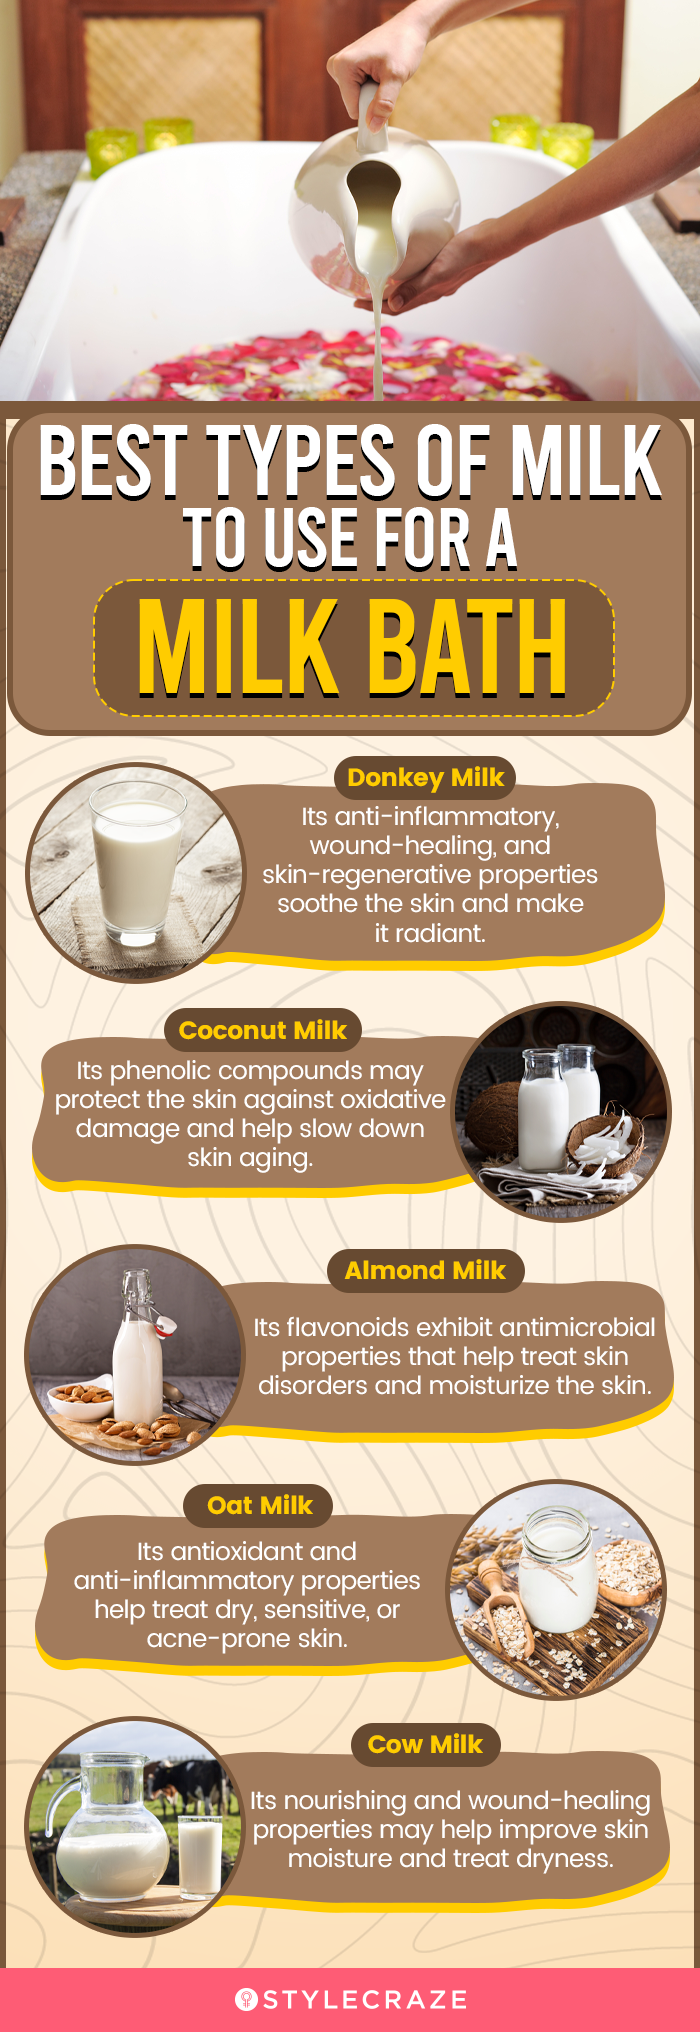 best types of milk to use for a milk bath (infographic)